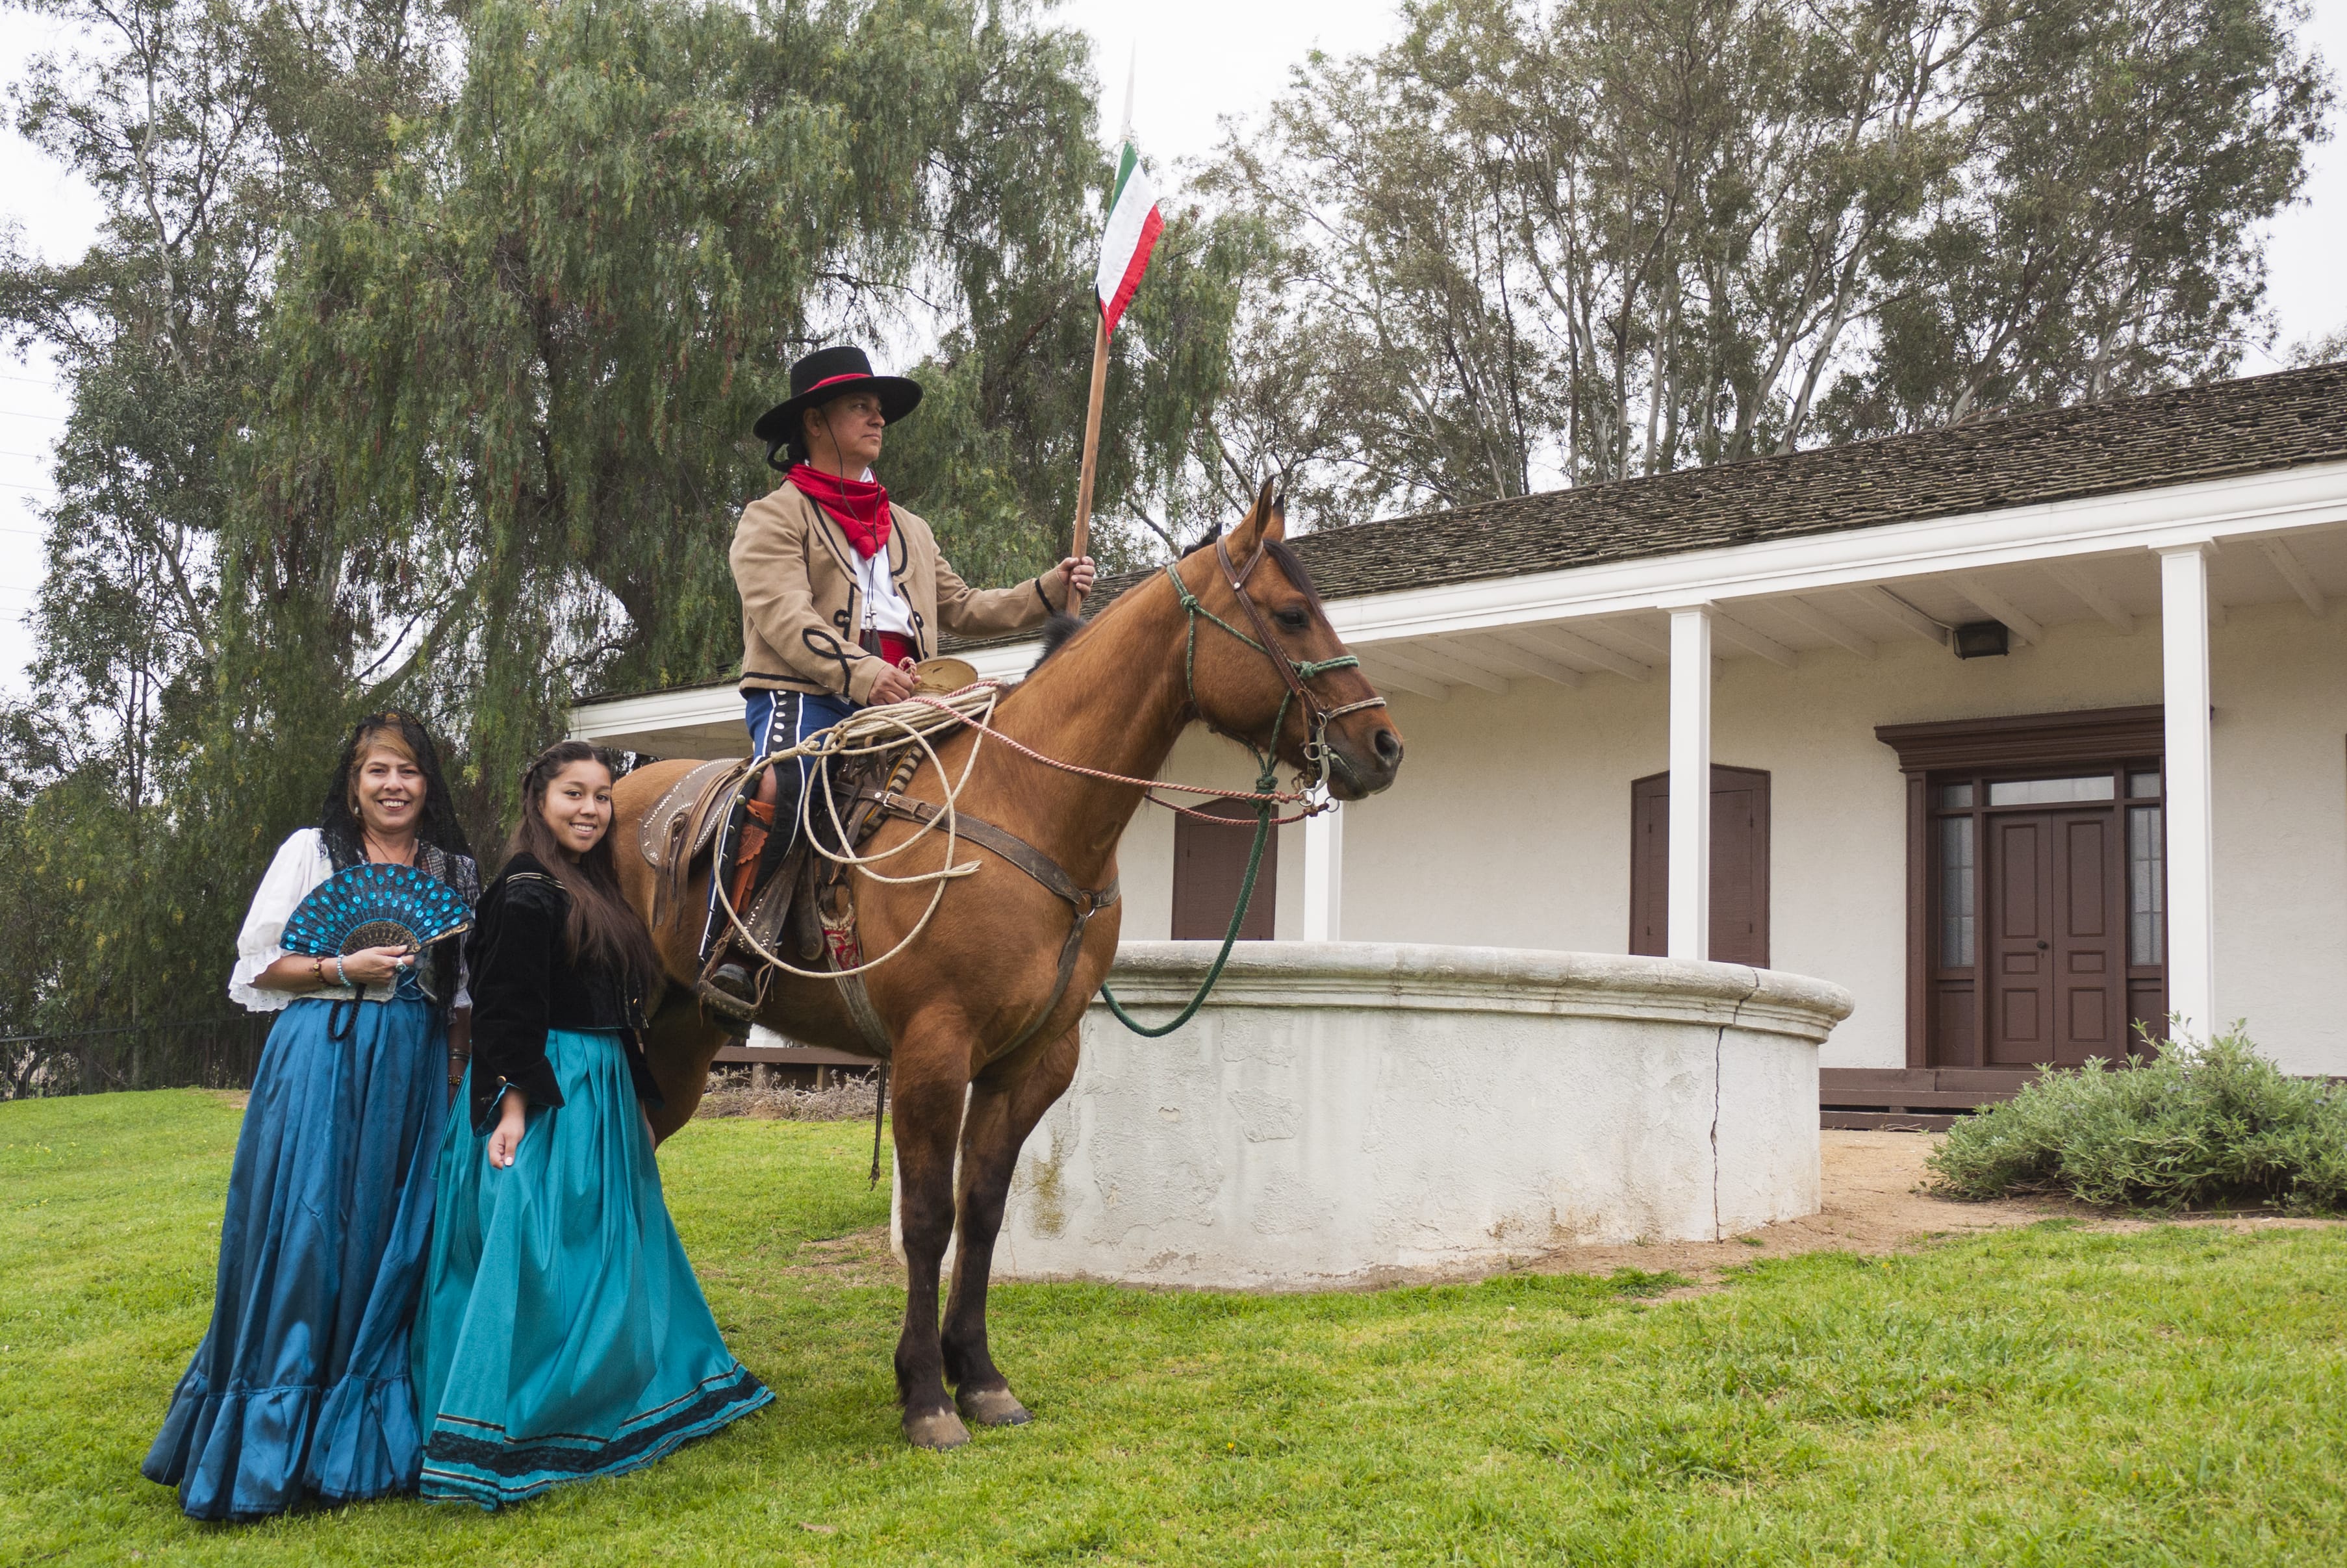 Montebello Historical Society Member on top of horse